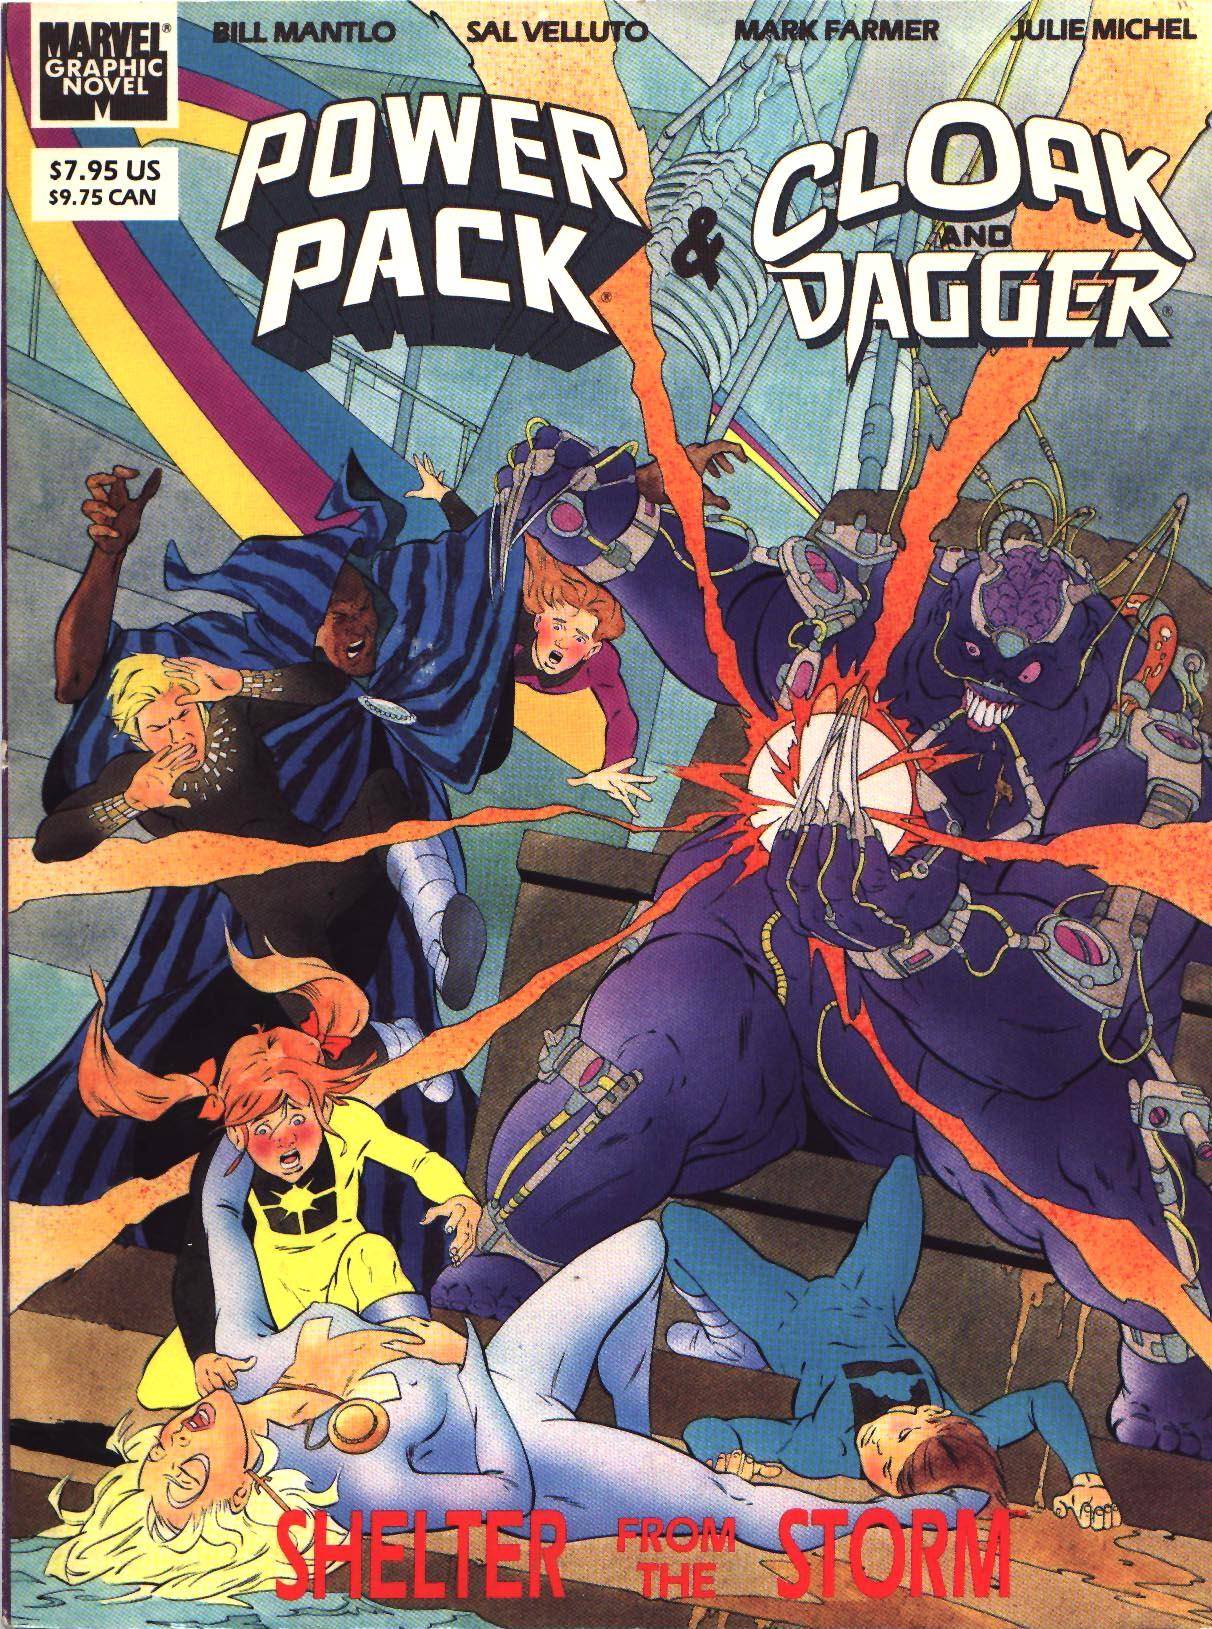 Marvel Graphic Novel 56 - Cloak and Dagger  Power Pack - Shelter From The Storm 1989